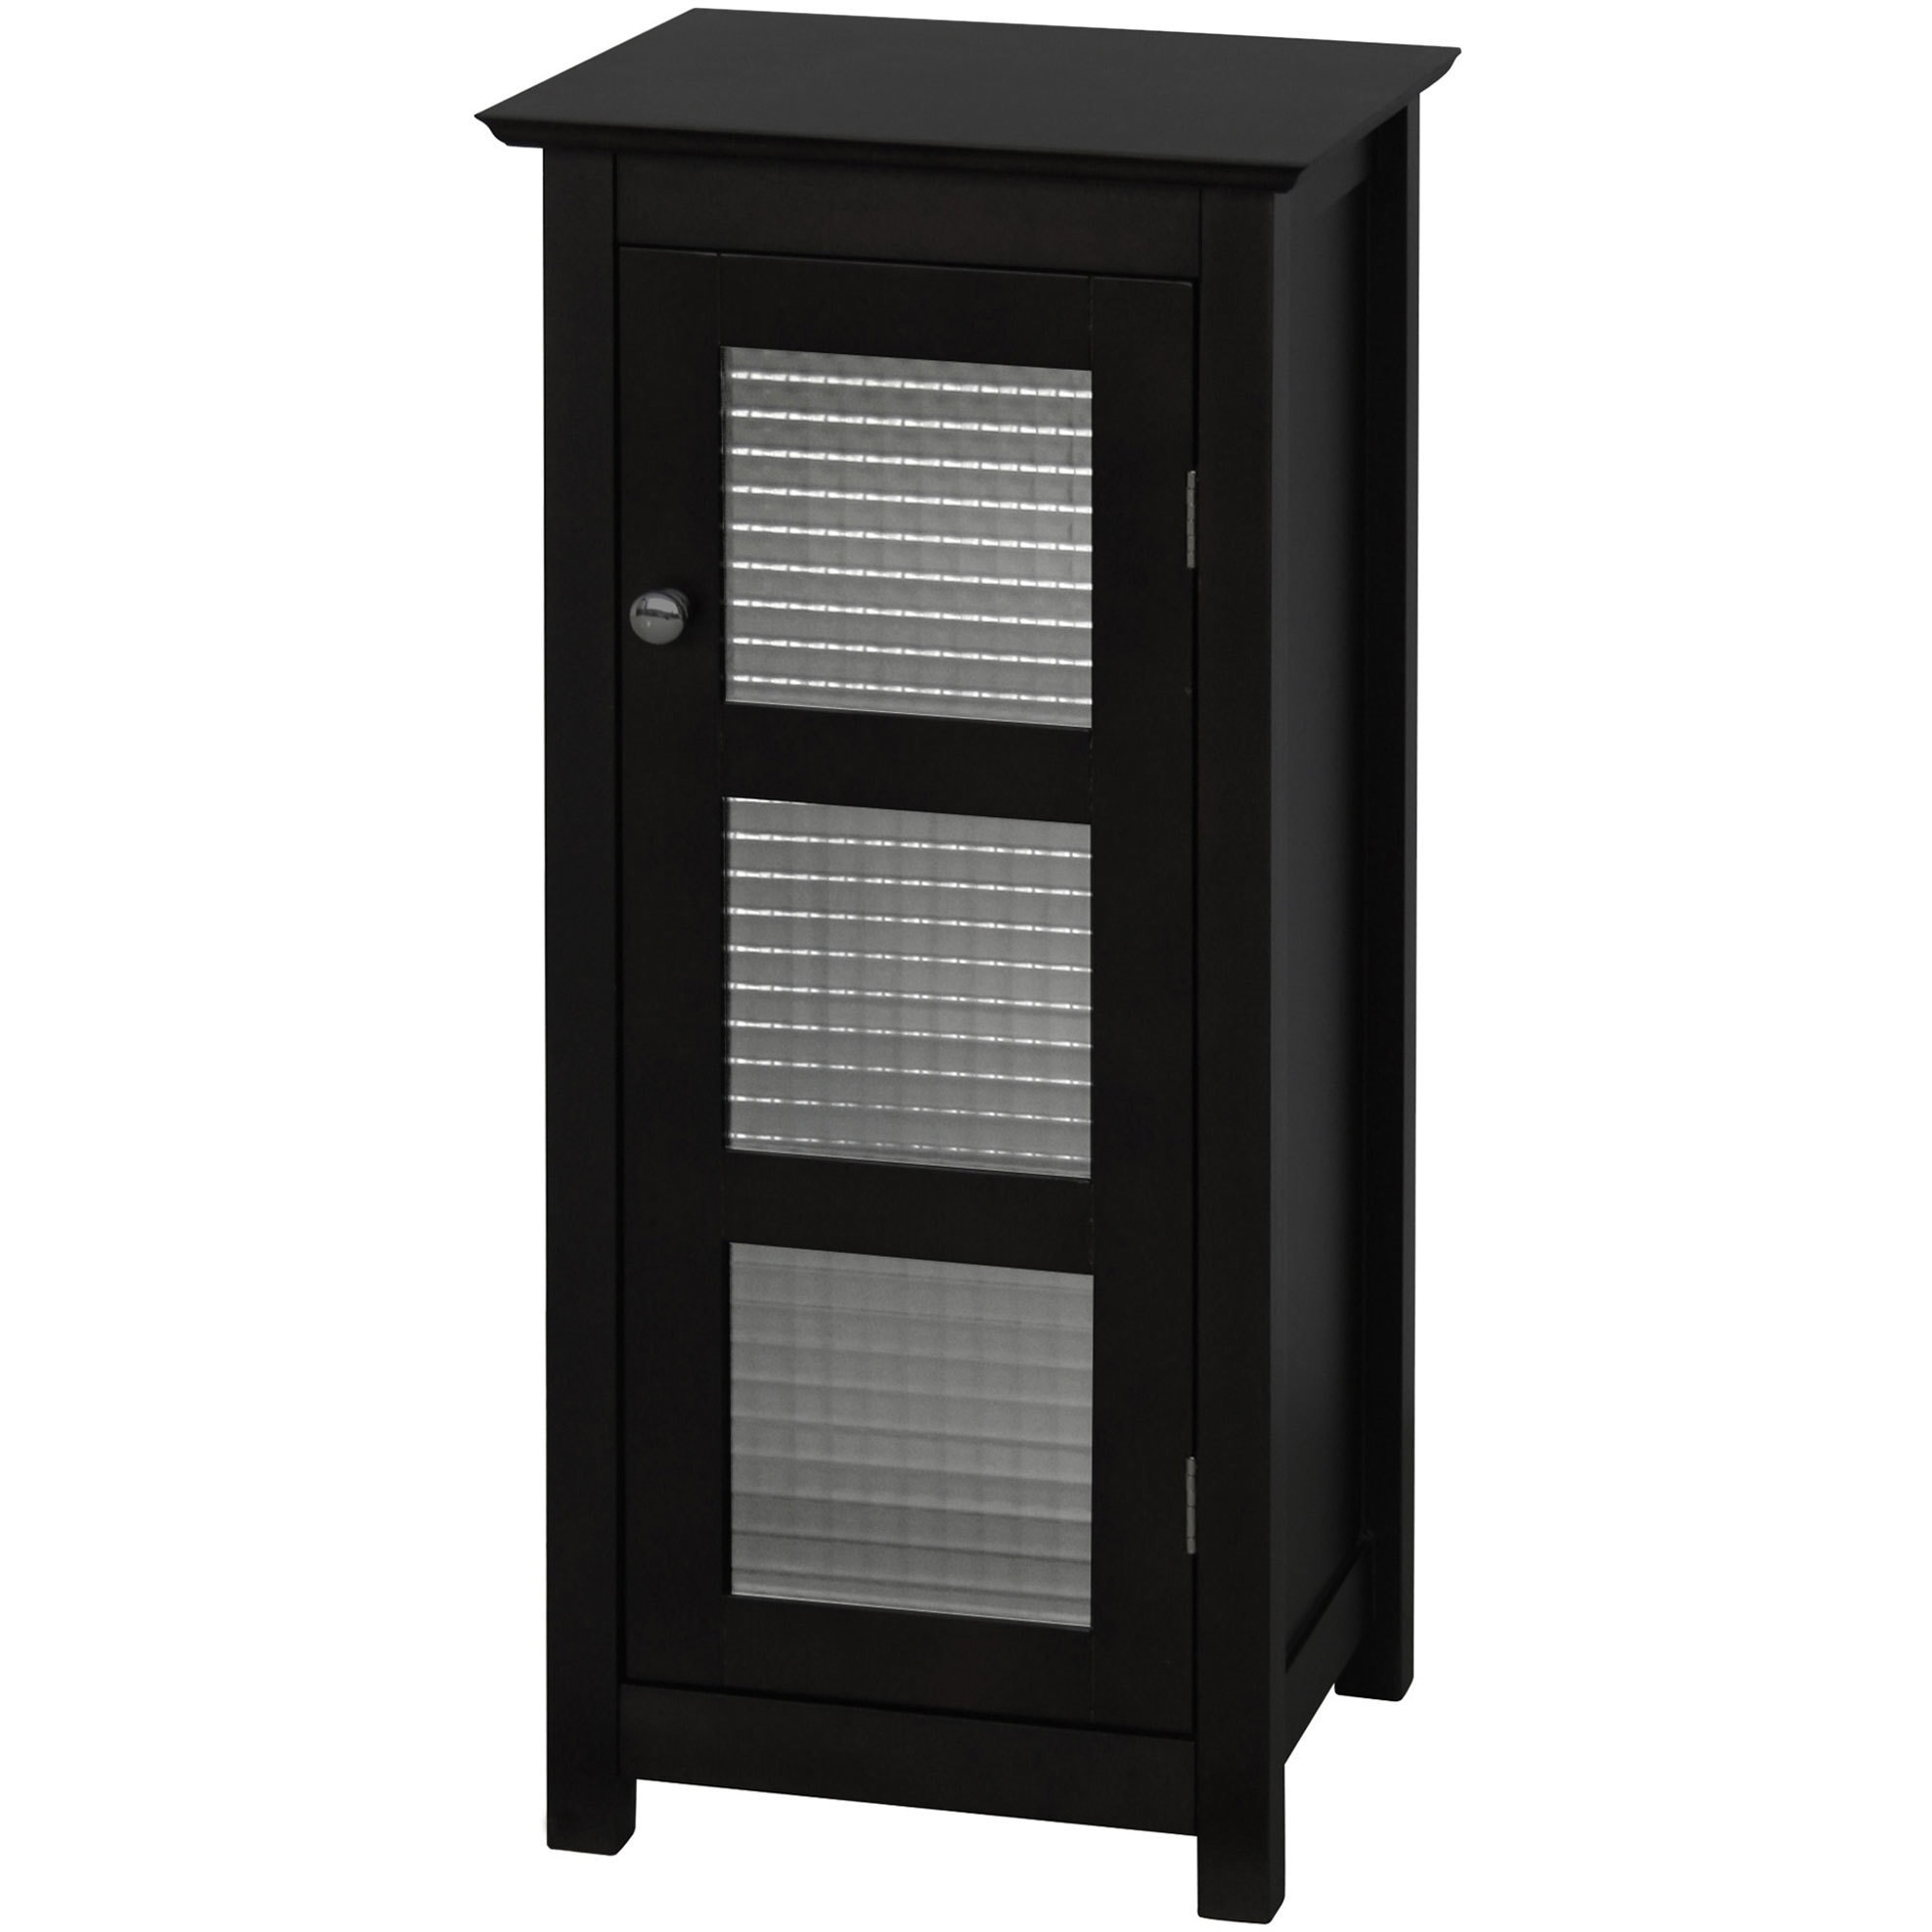 cabinet with glass door compare $ 110 99 today $ 71 75 save 35 % 4